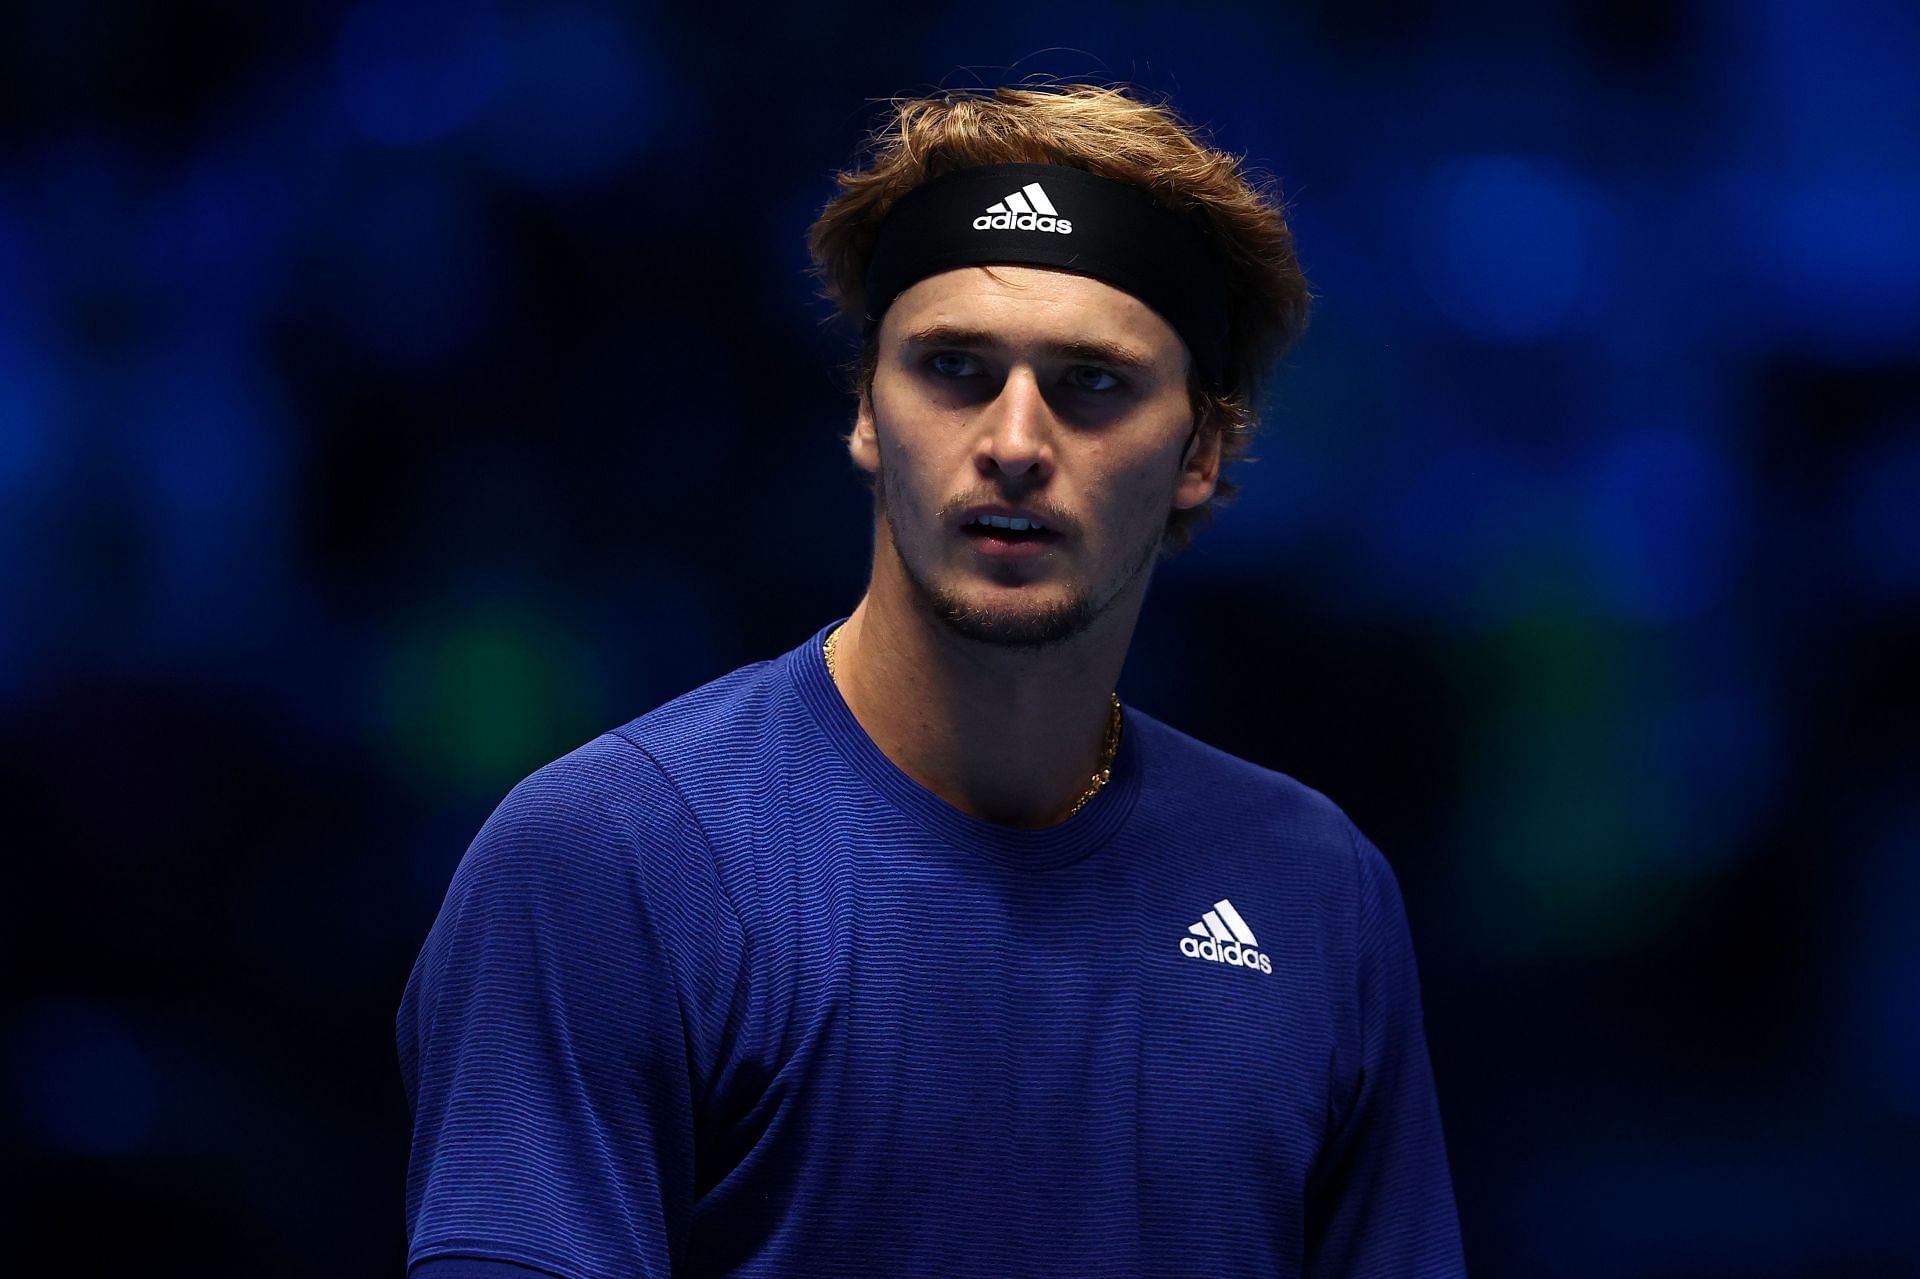 Alexander Zverev said he apologized to the chair umpire